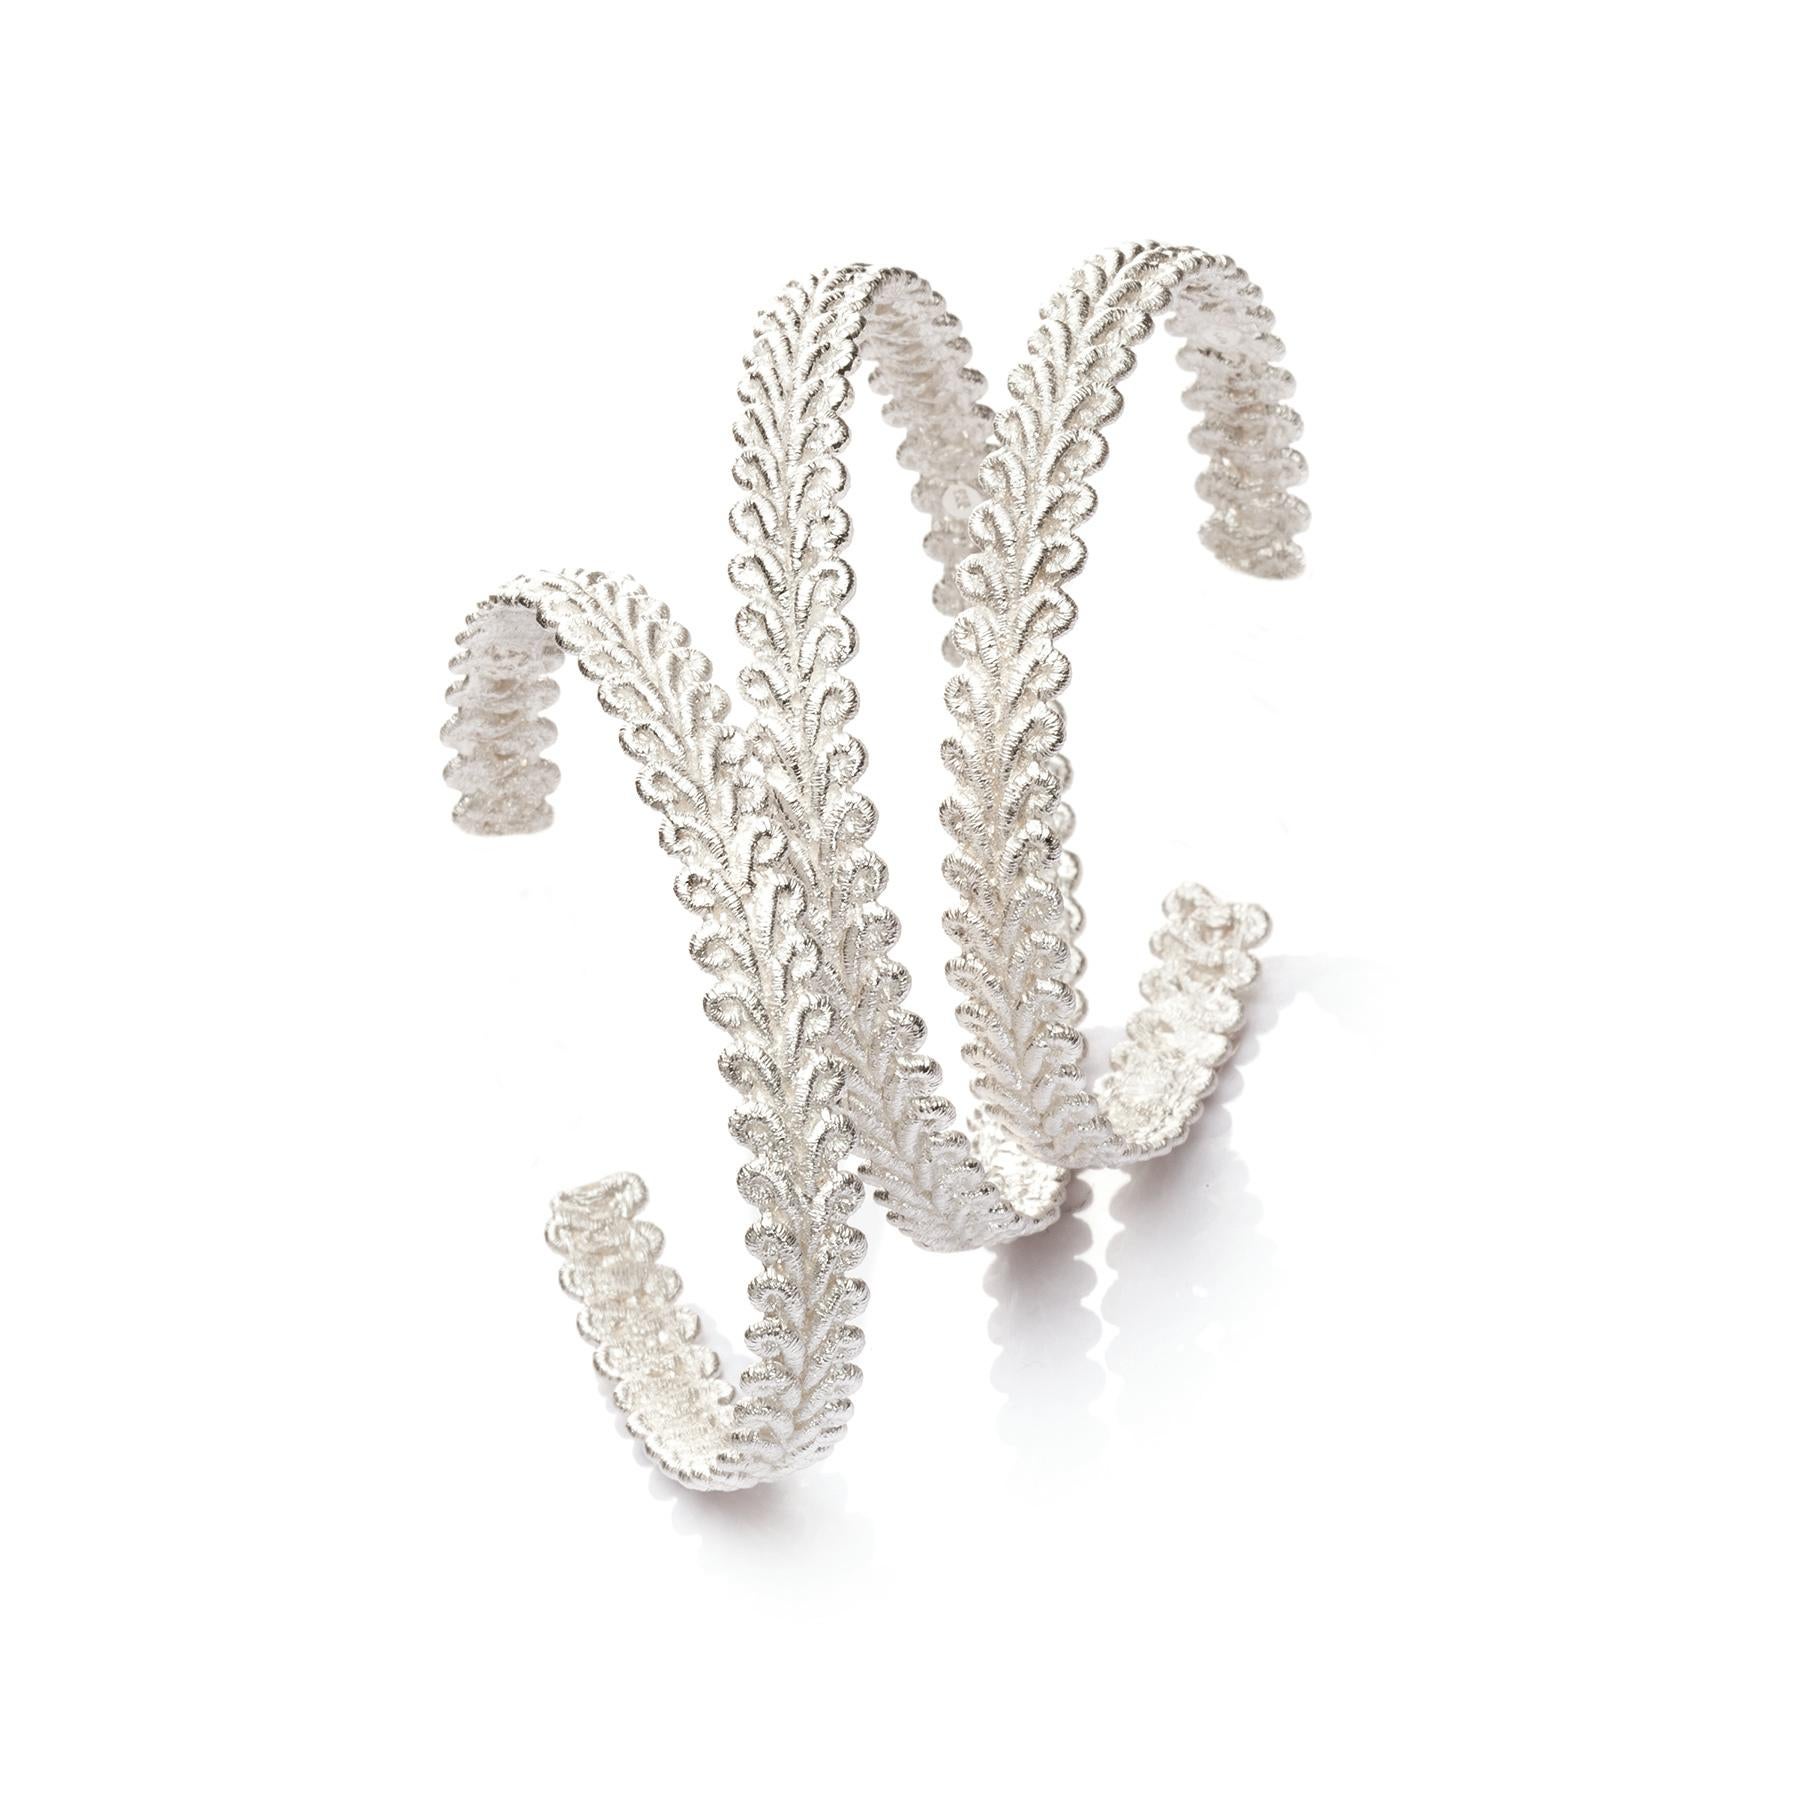 Made in sterling silver, this delicate cuff is perfect for a bride to be or for anyone who is a true romantic at heart! Brigitte takes her inspiration from lace and this Bordure bracelet is a perfect example of understated femininity.

Like an